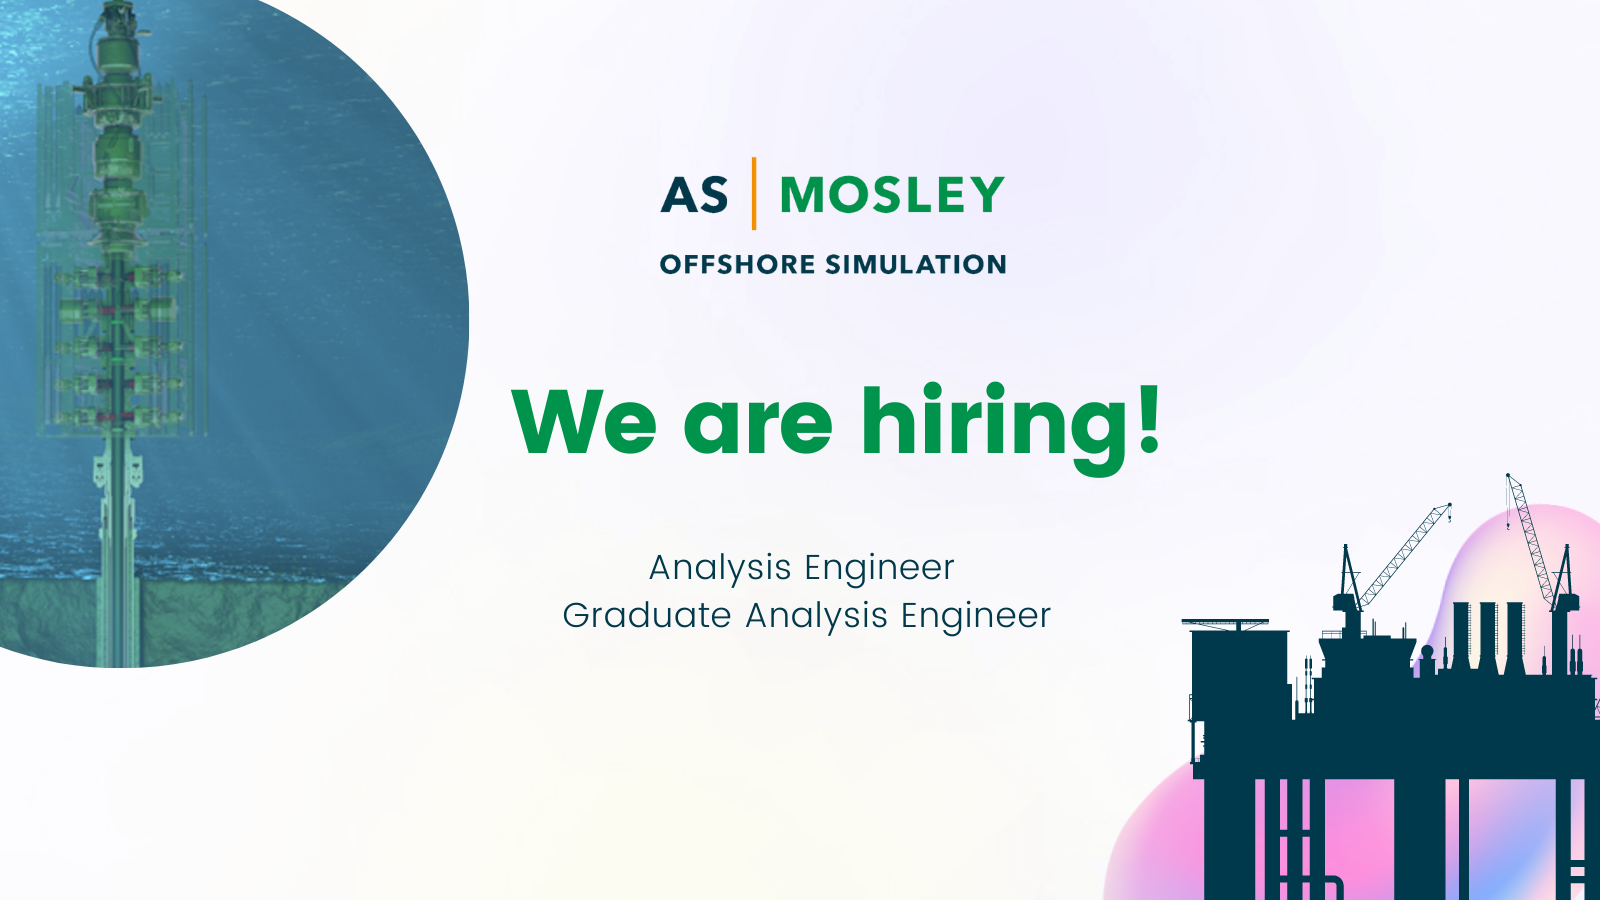 Job opportunities at AS Mosley